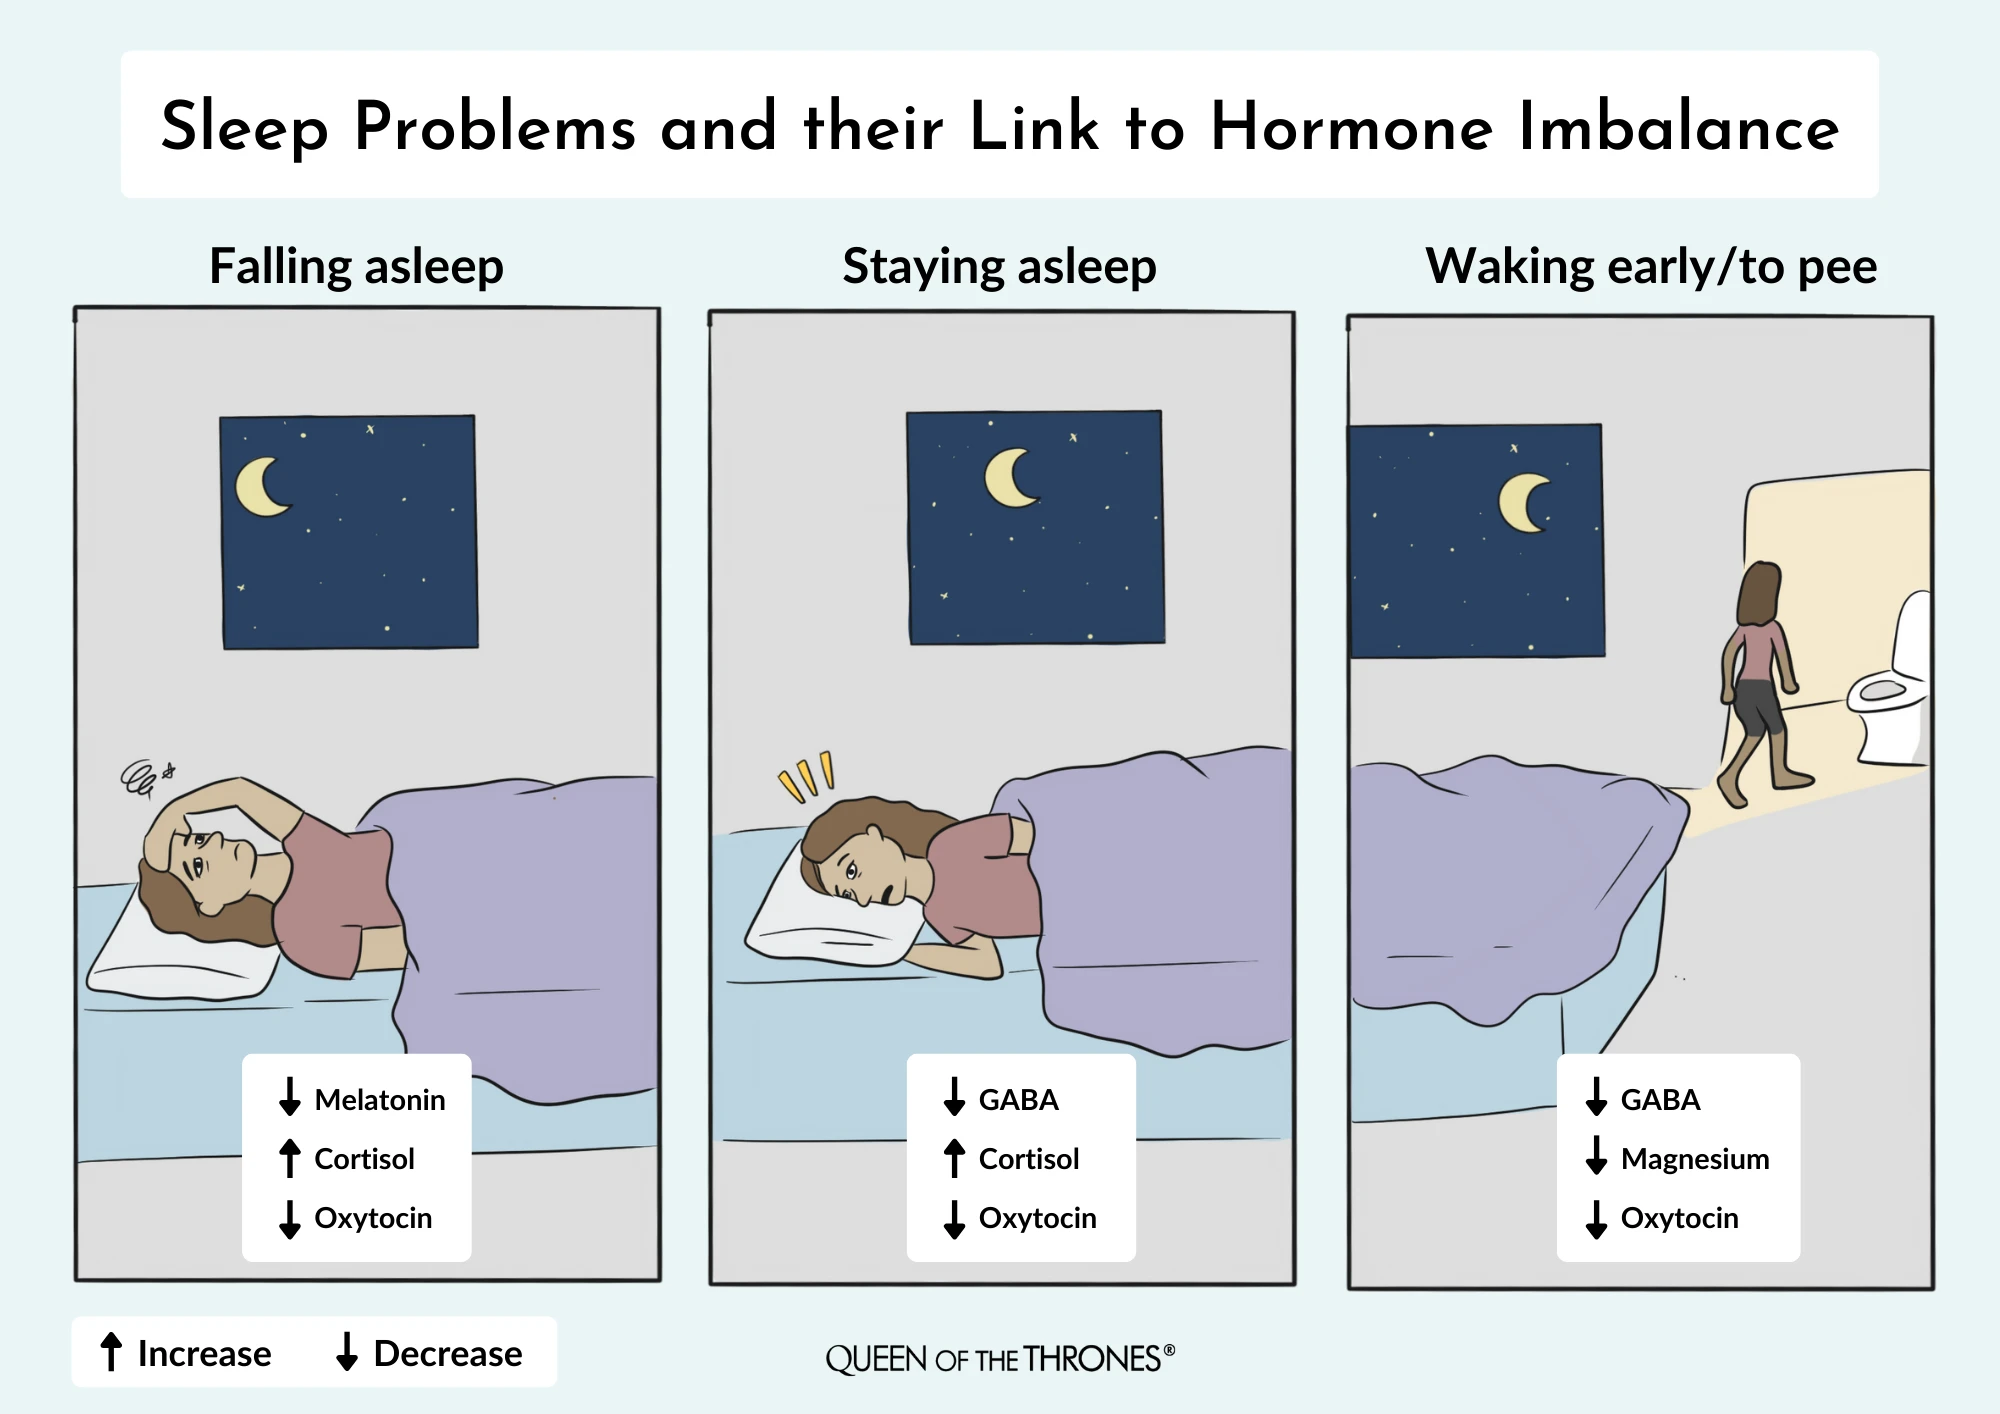 Sleep problems and their link to hormone imbalance by Queen of the Thrones